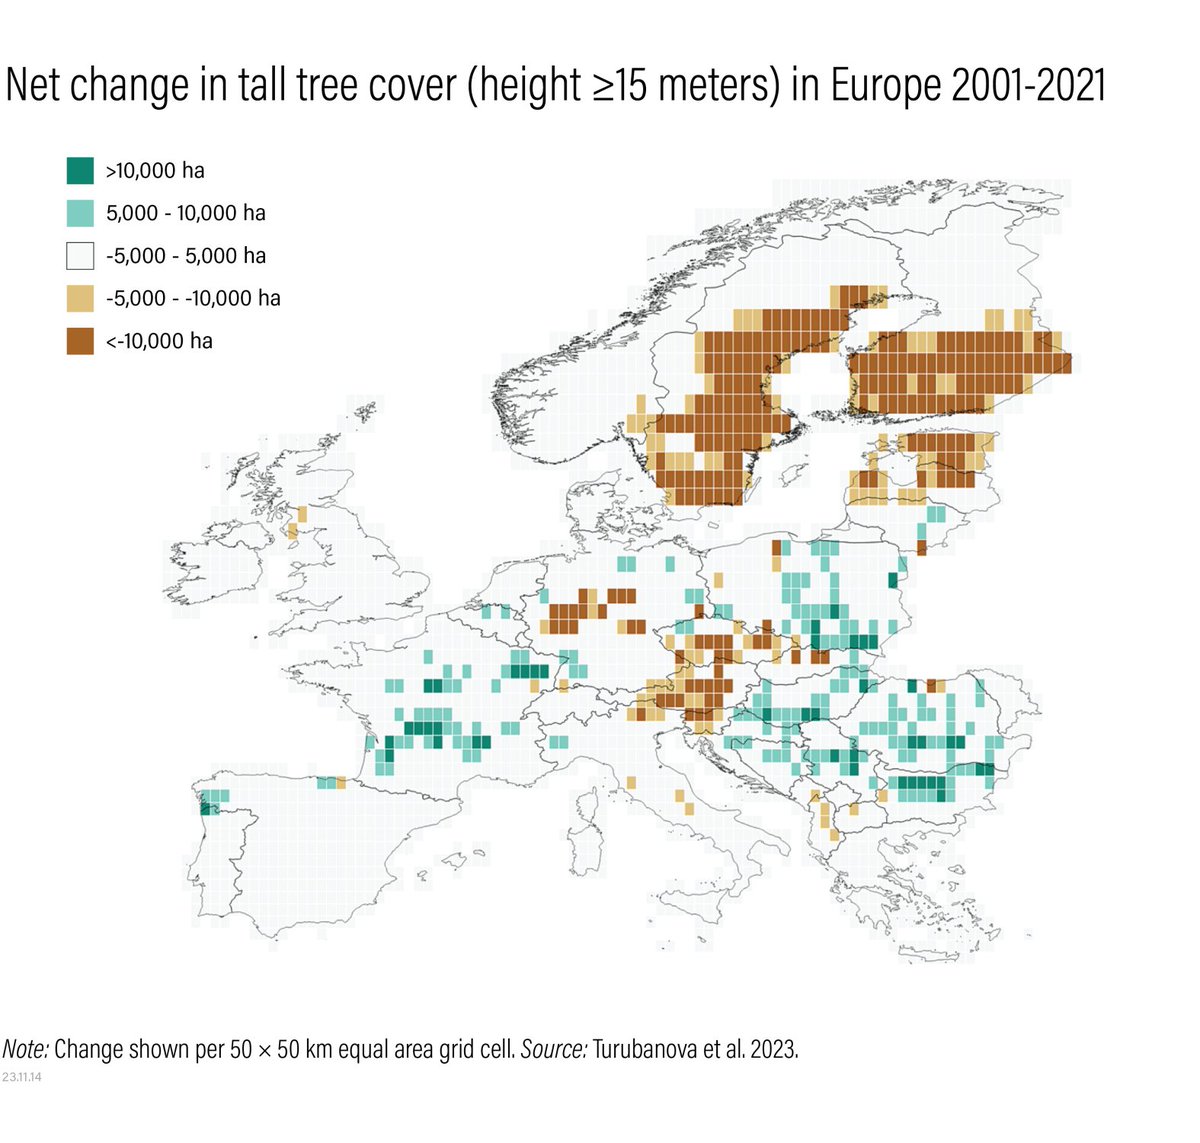 A recent analysis found that tall, mature #forests — which are critical for storing carbon and safeguarding #biodiversity — are declining significantly in some parts of Europe🌳🌏 Learn more👉 bit.ly/477uFAY